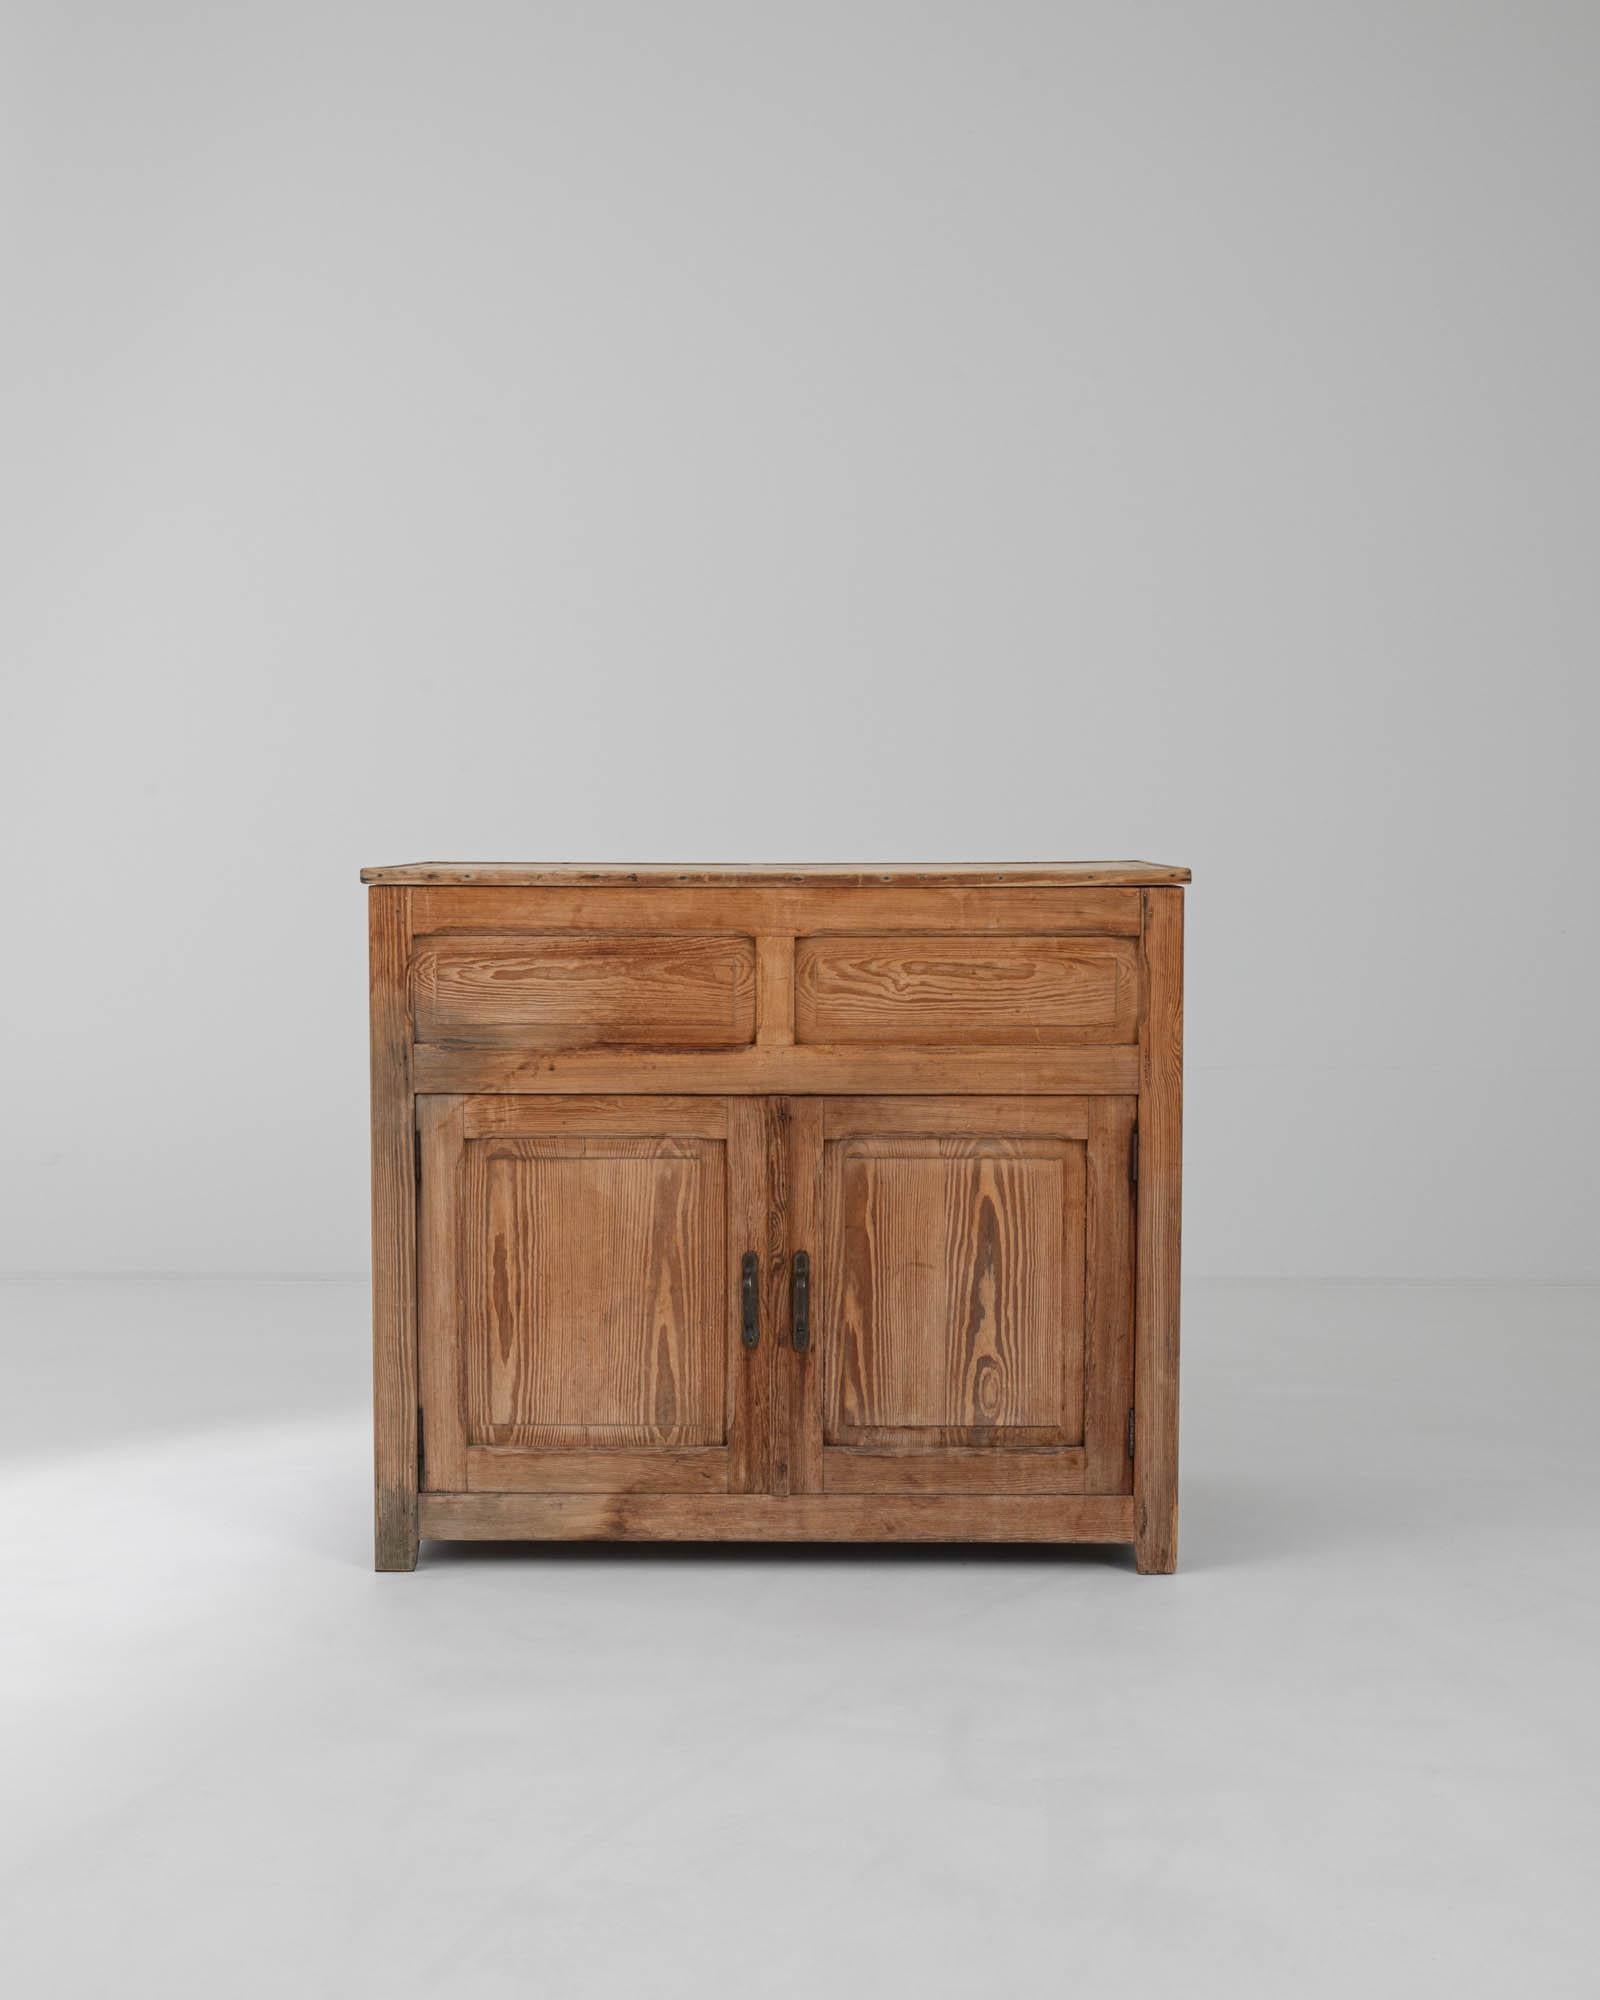 This delightful vintage wooden buffet offers a simple country design with a bright natural finish. Built in France at the turn of the century, deep cupboards offer ample storage space, while the upper surface of the cabinet lifts up to reveal a